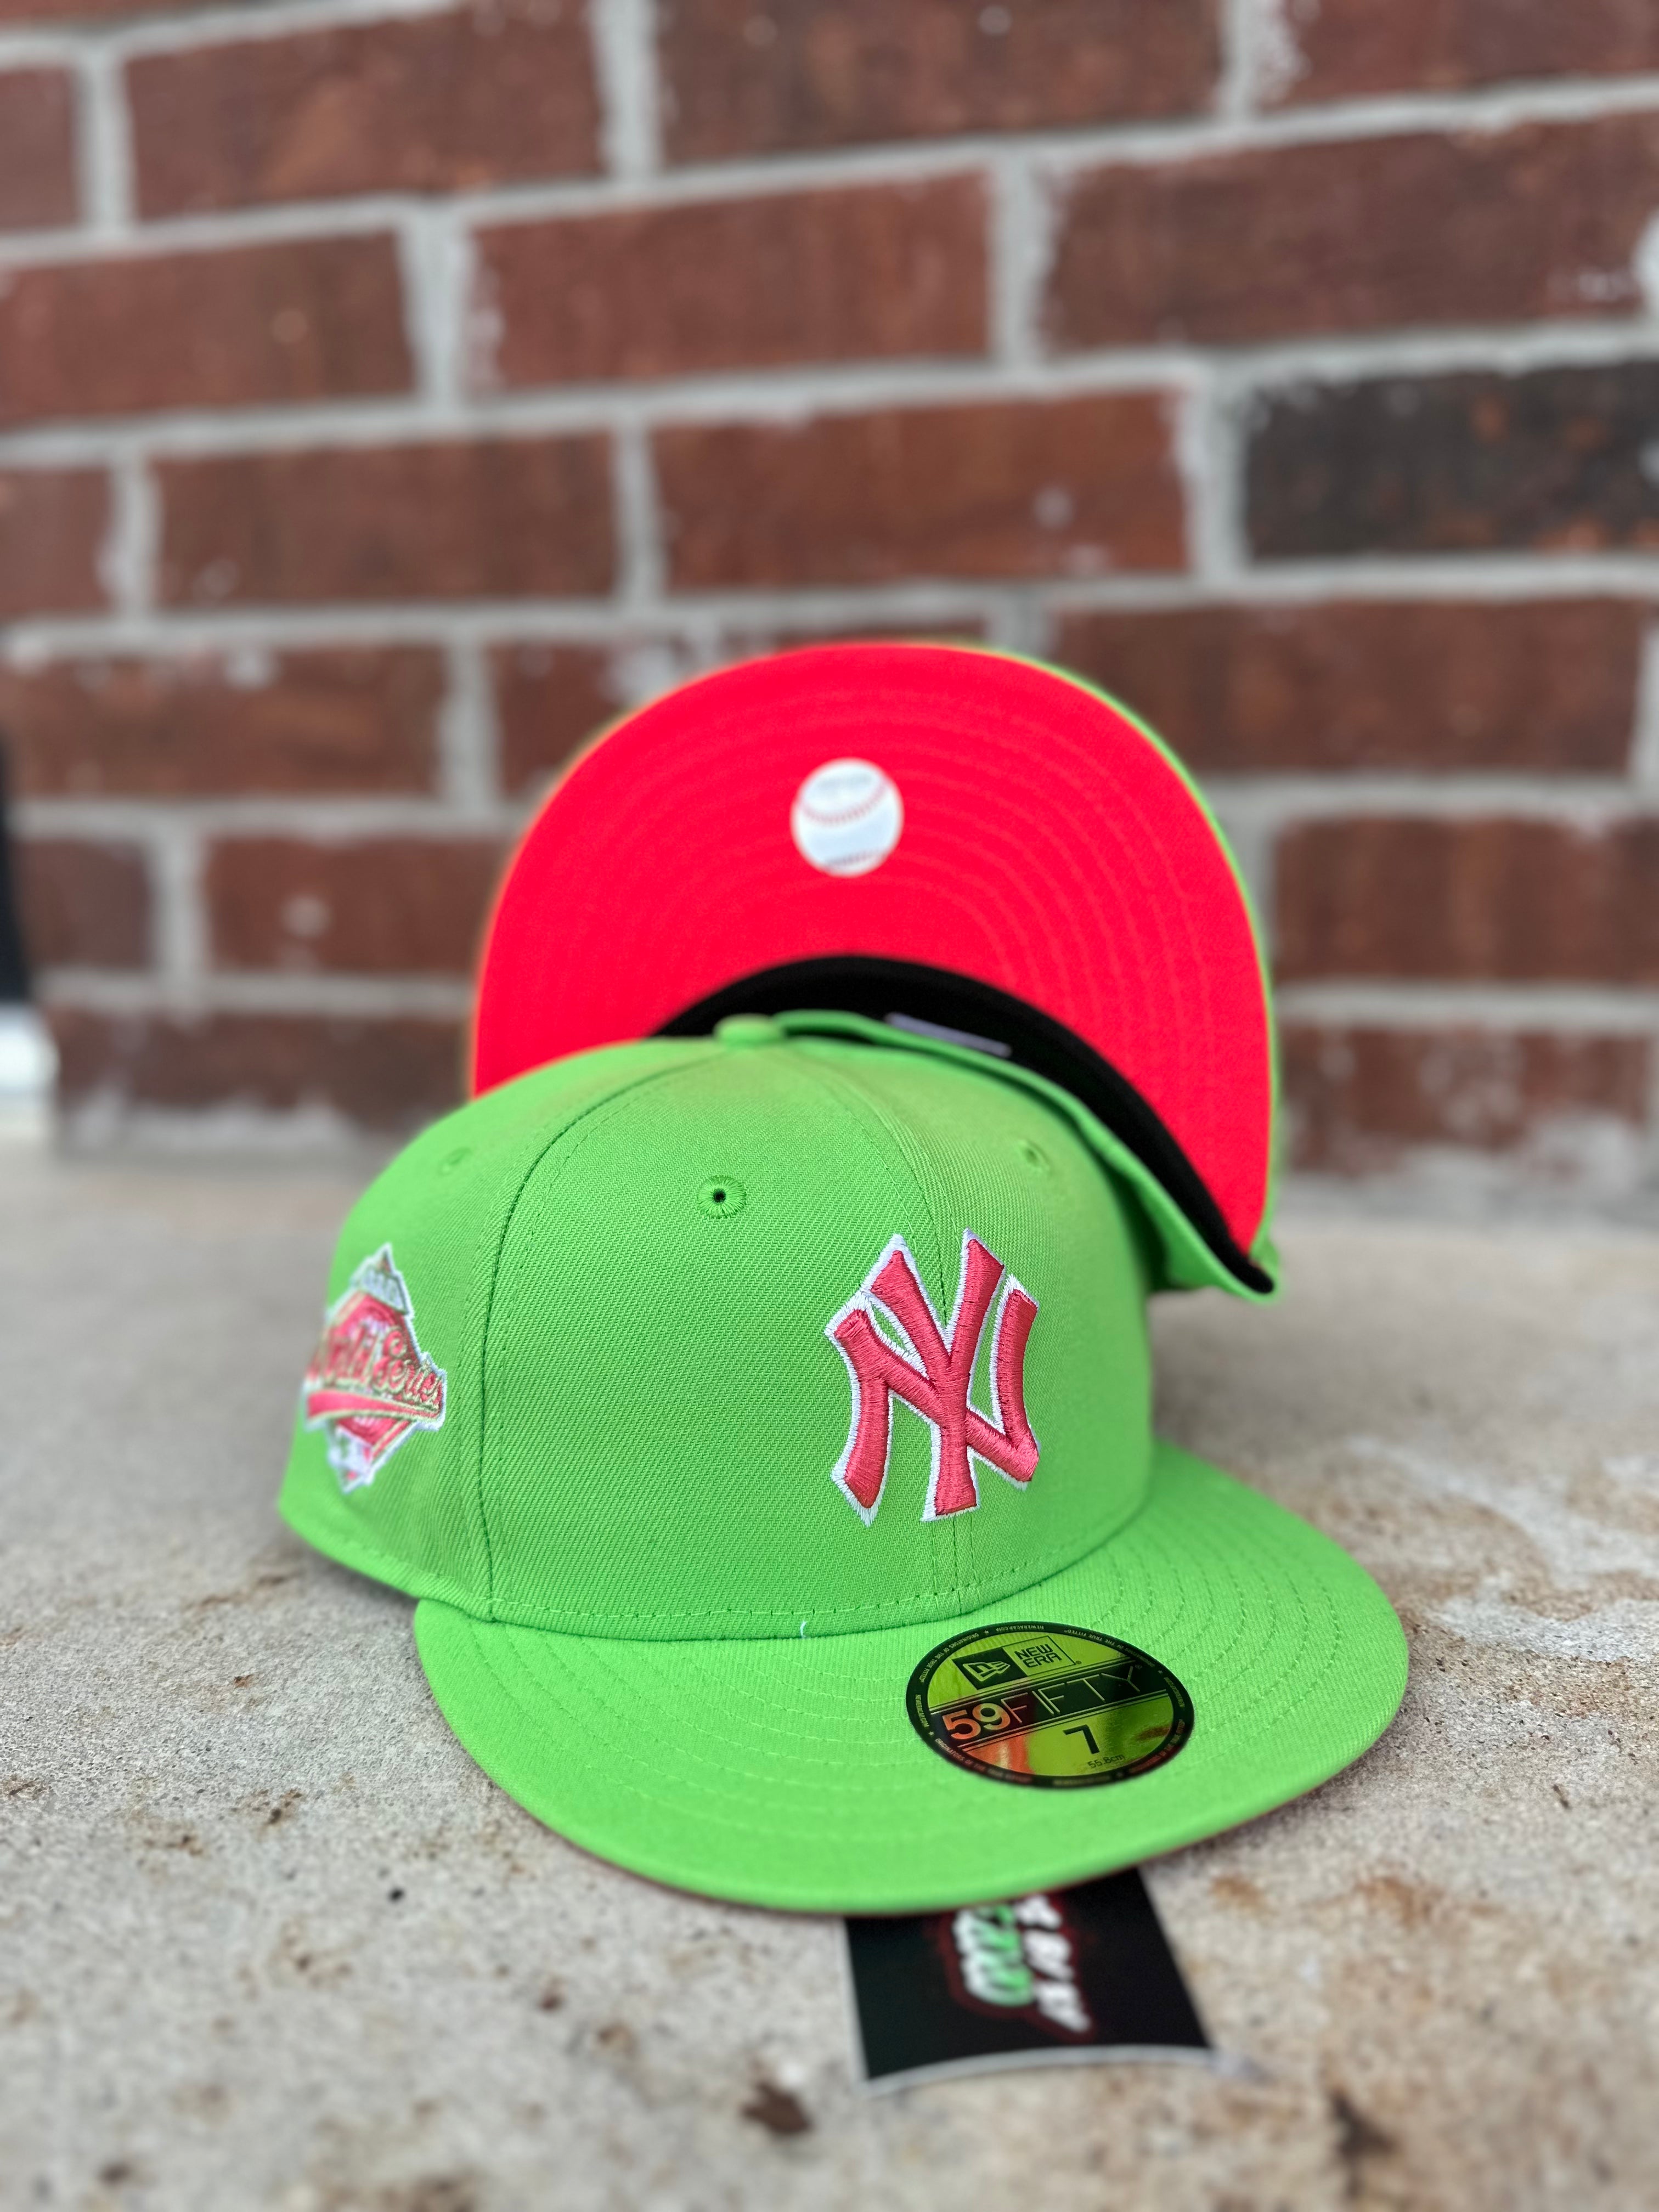 New Era 59 FIFTY Fitted "New York Yankees" 1989 World Series Green/Pink